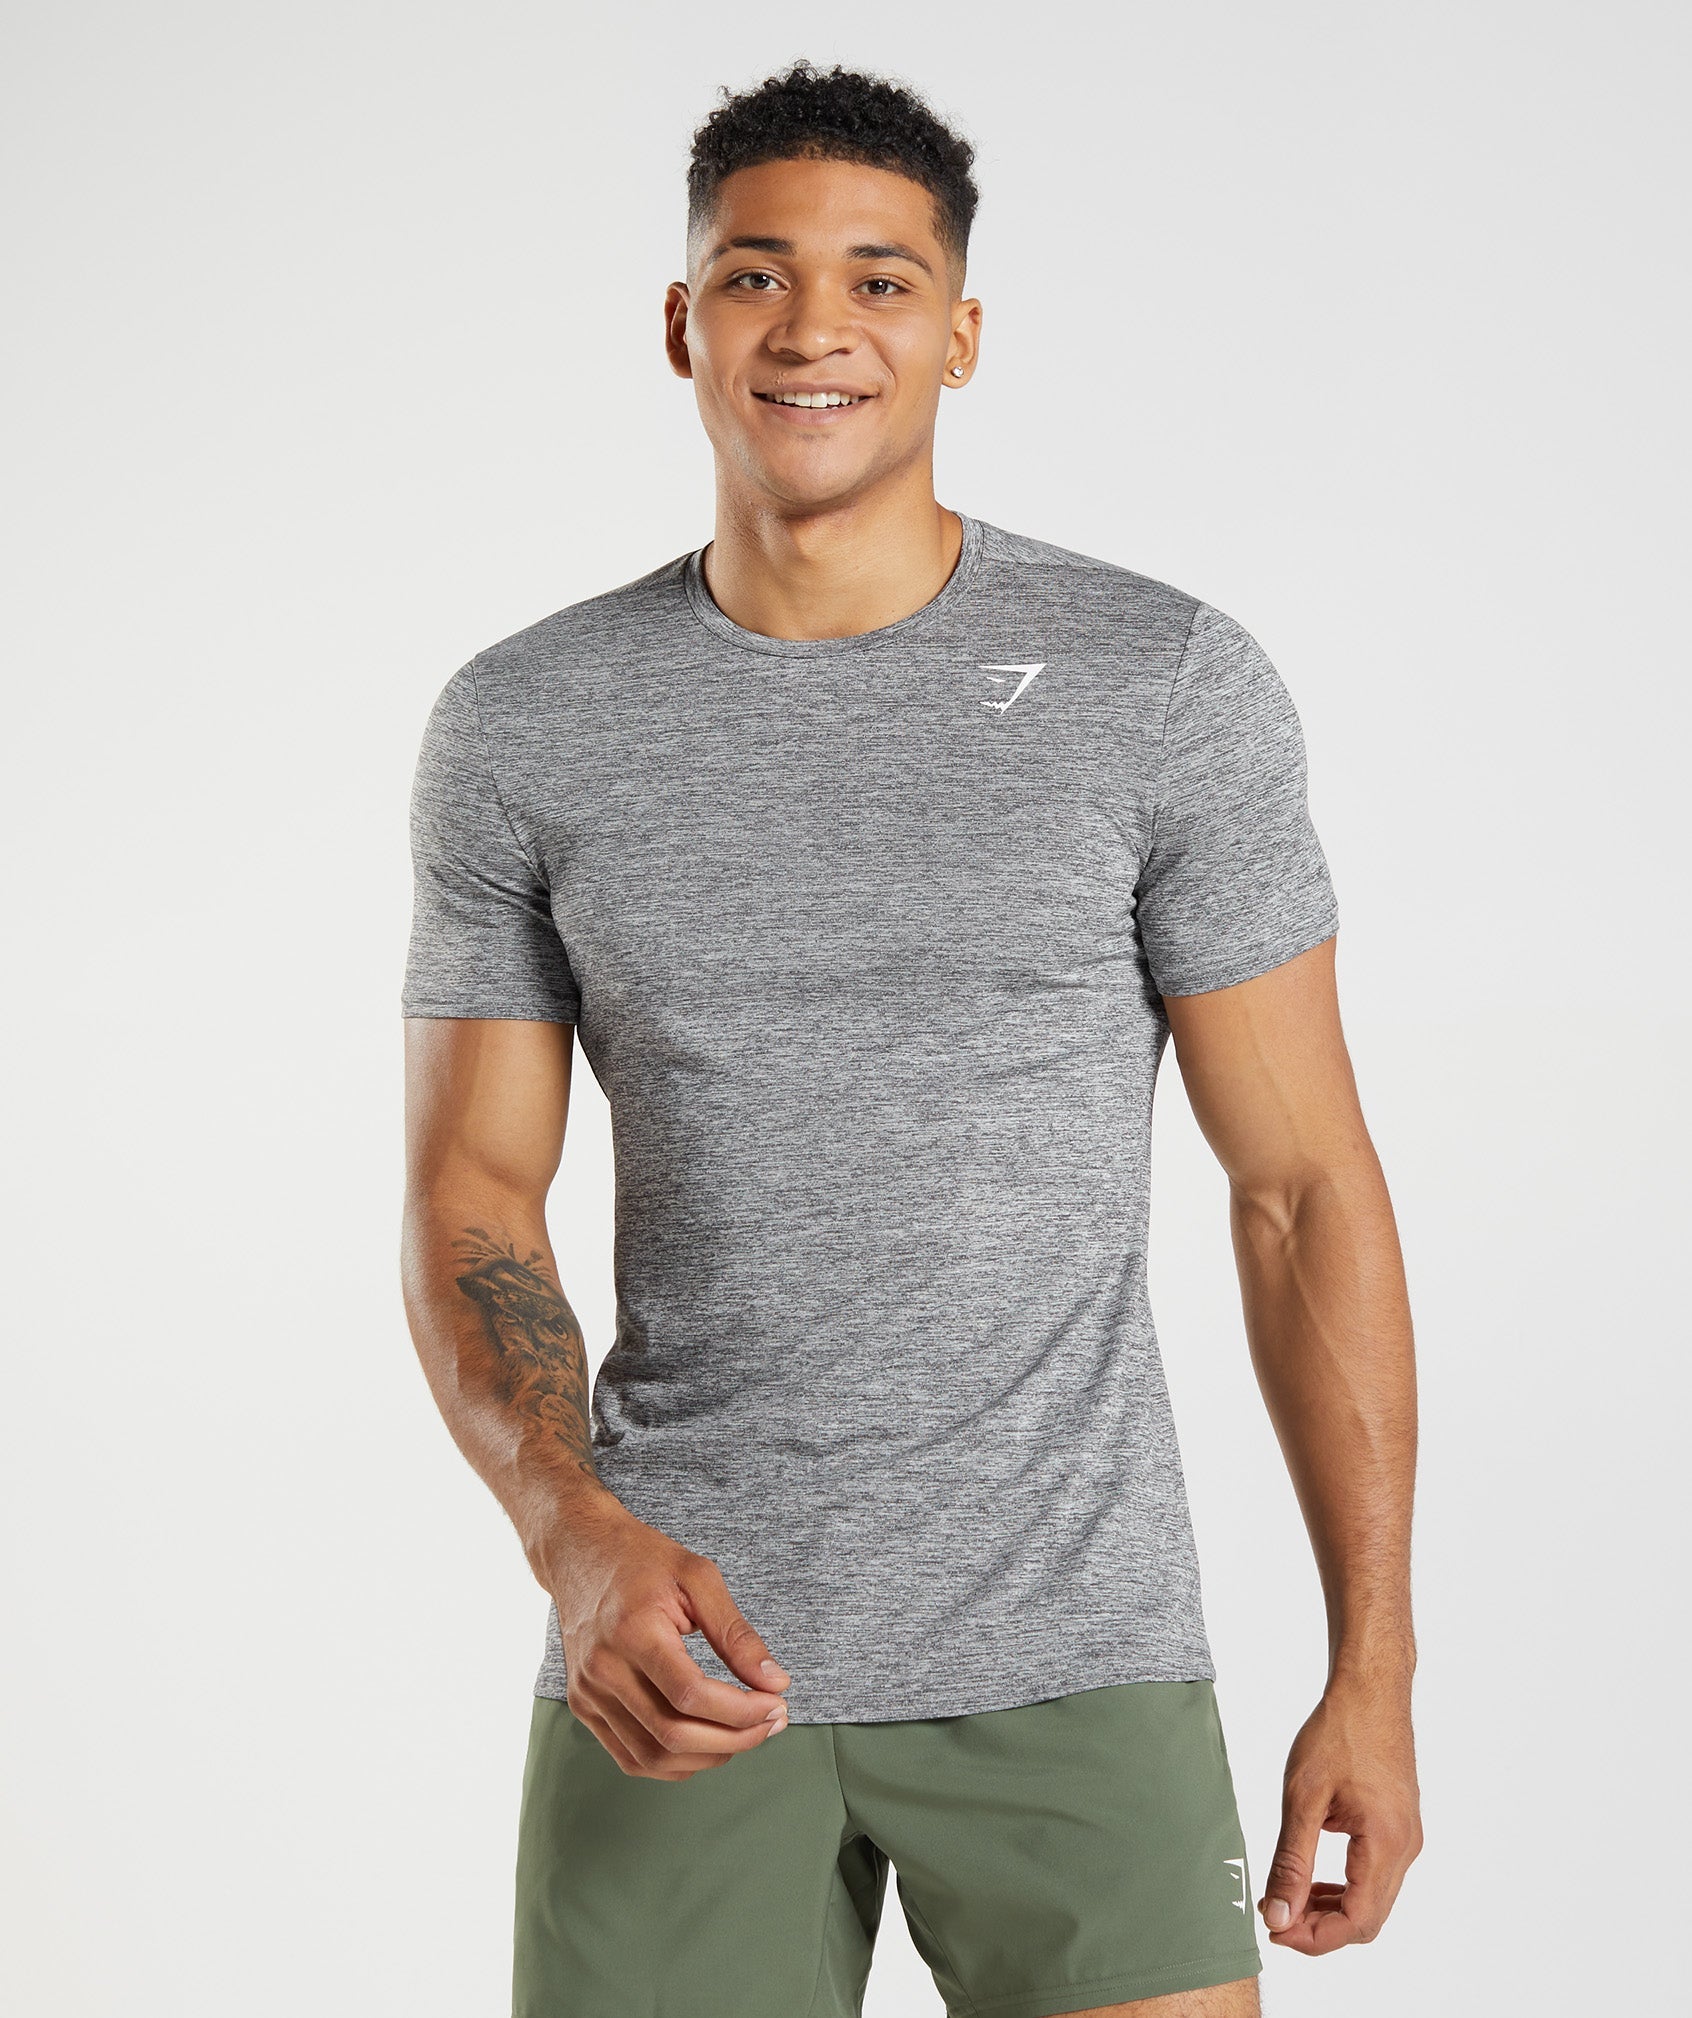 Arrival Marl T-Shirt in Silhouette Grey/Light Grey Marl